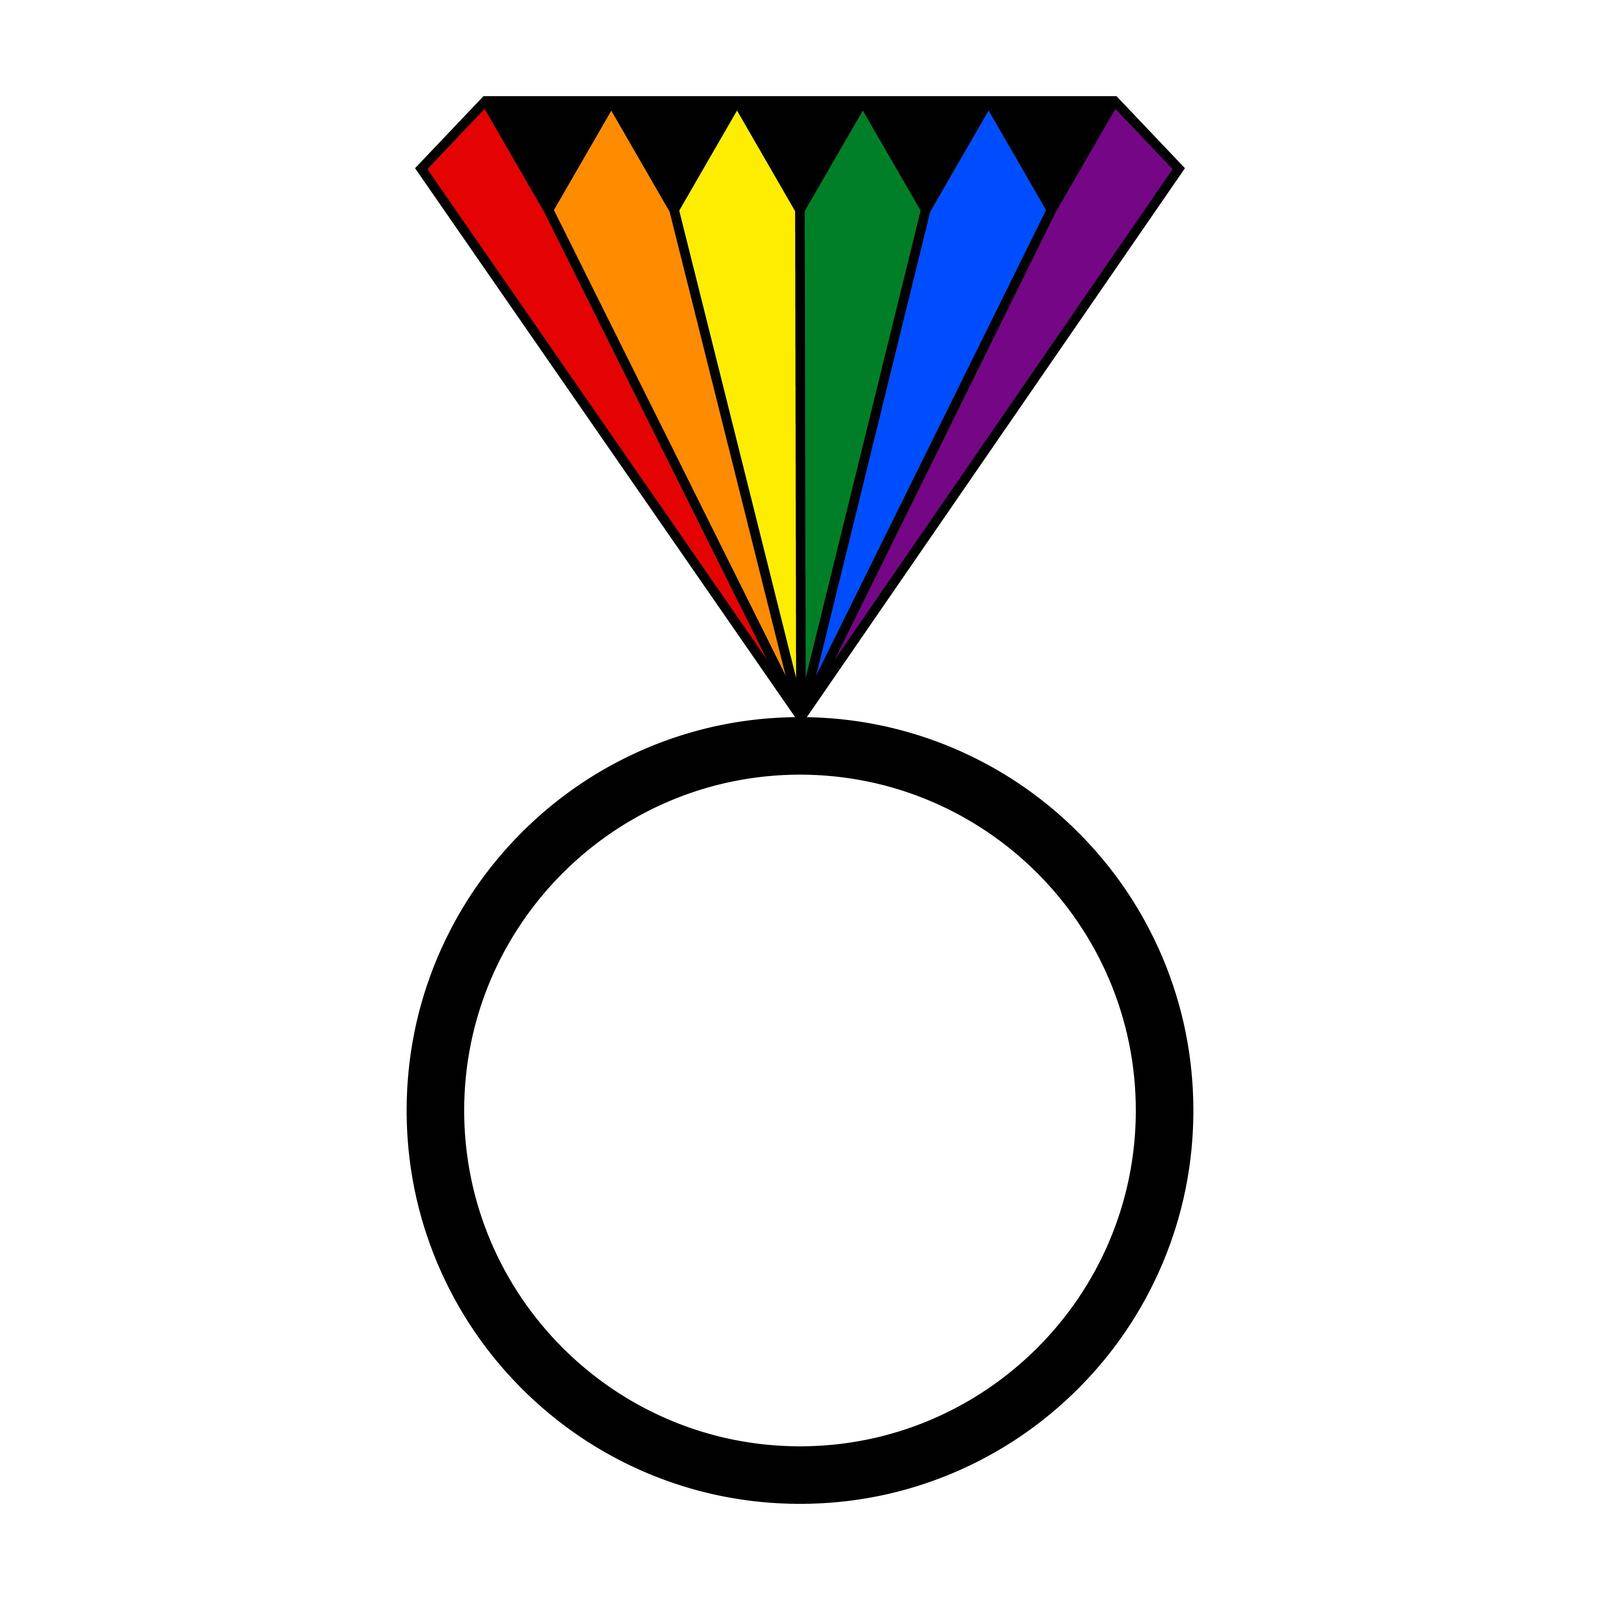 Ring with LGBT flag pictogram vector illustration.